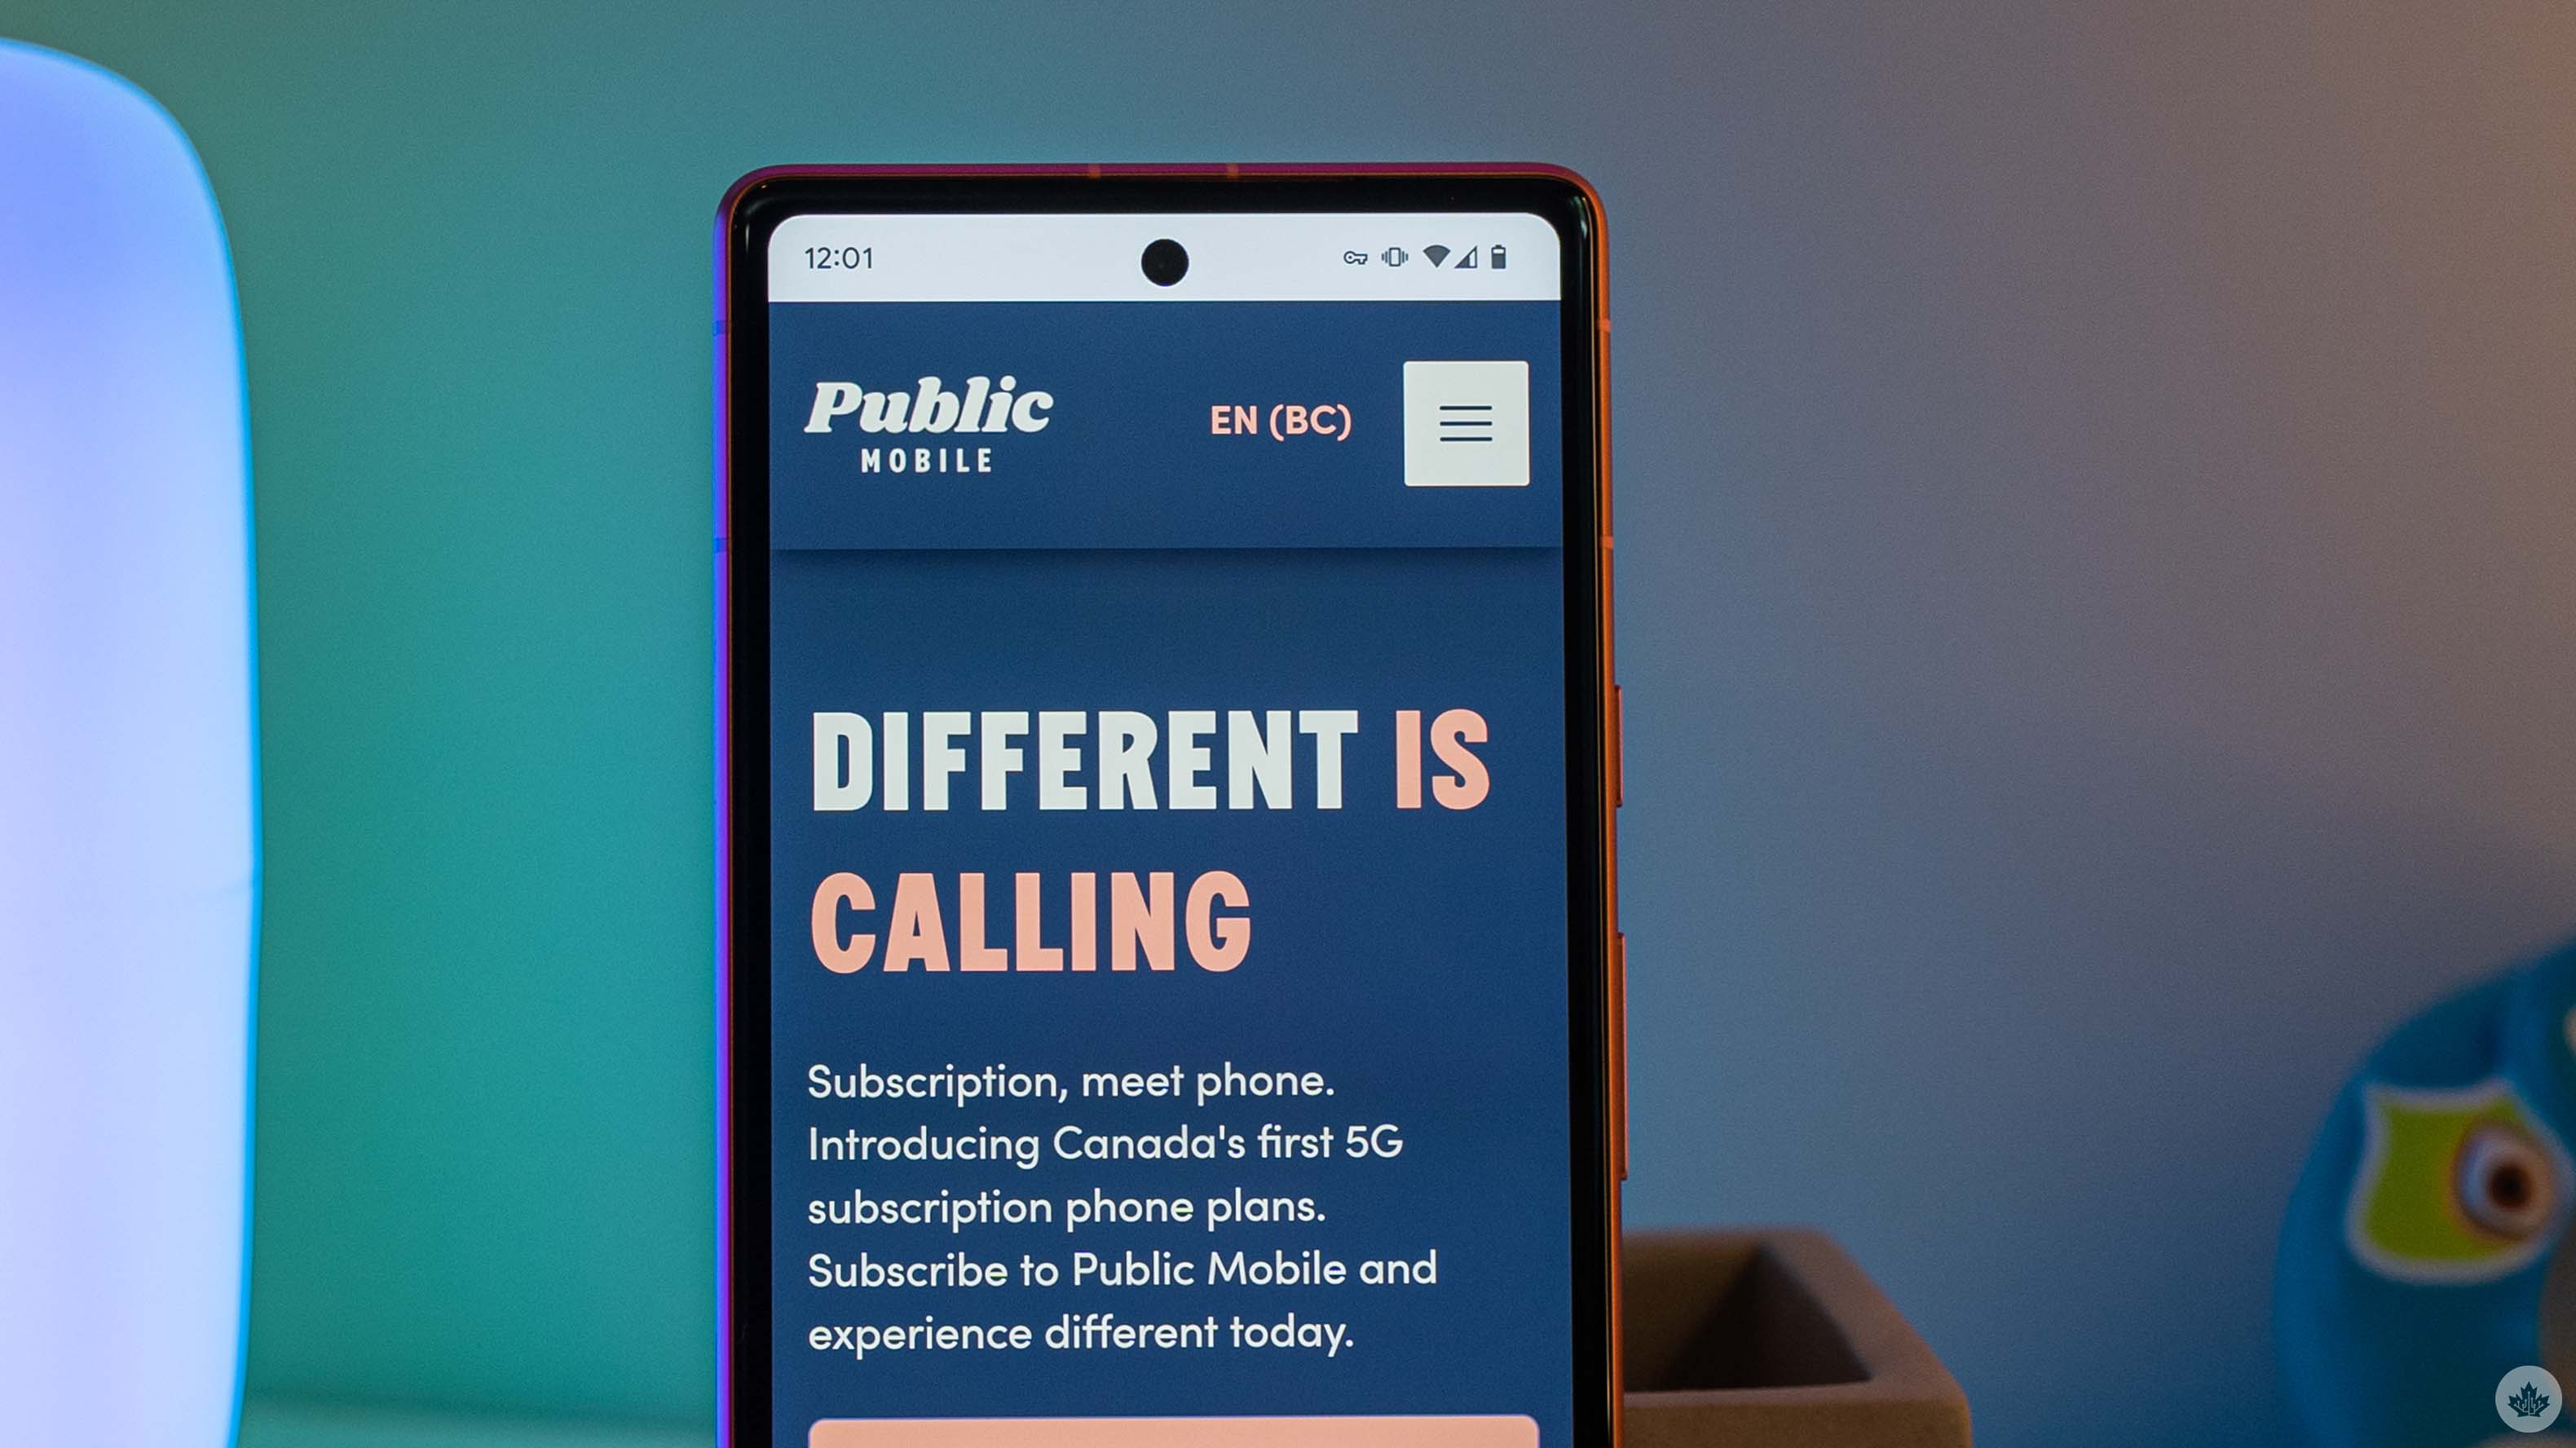 Public Mobile offering /50GB 5G plan on a 90-day subscription